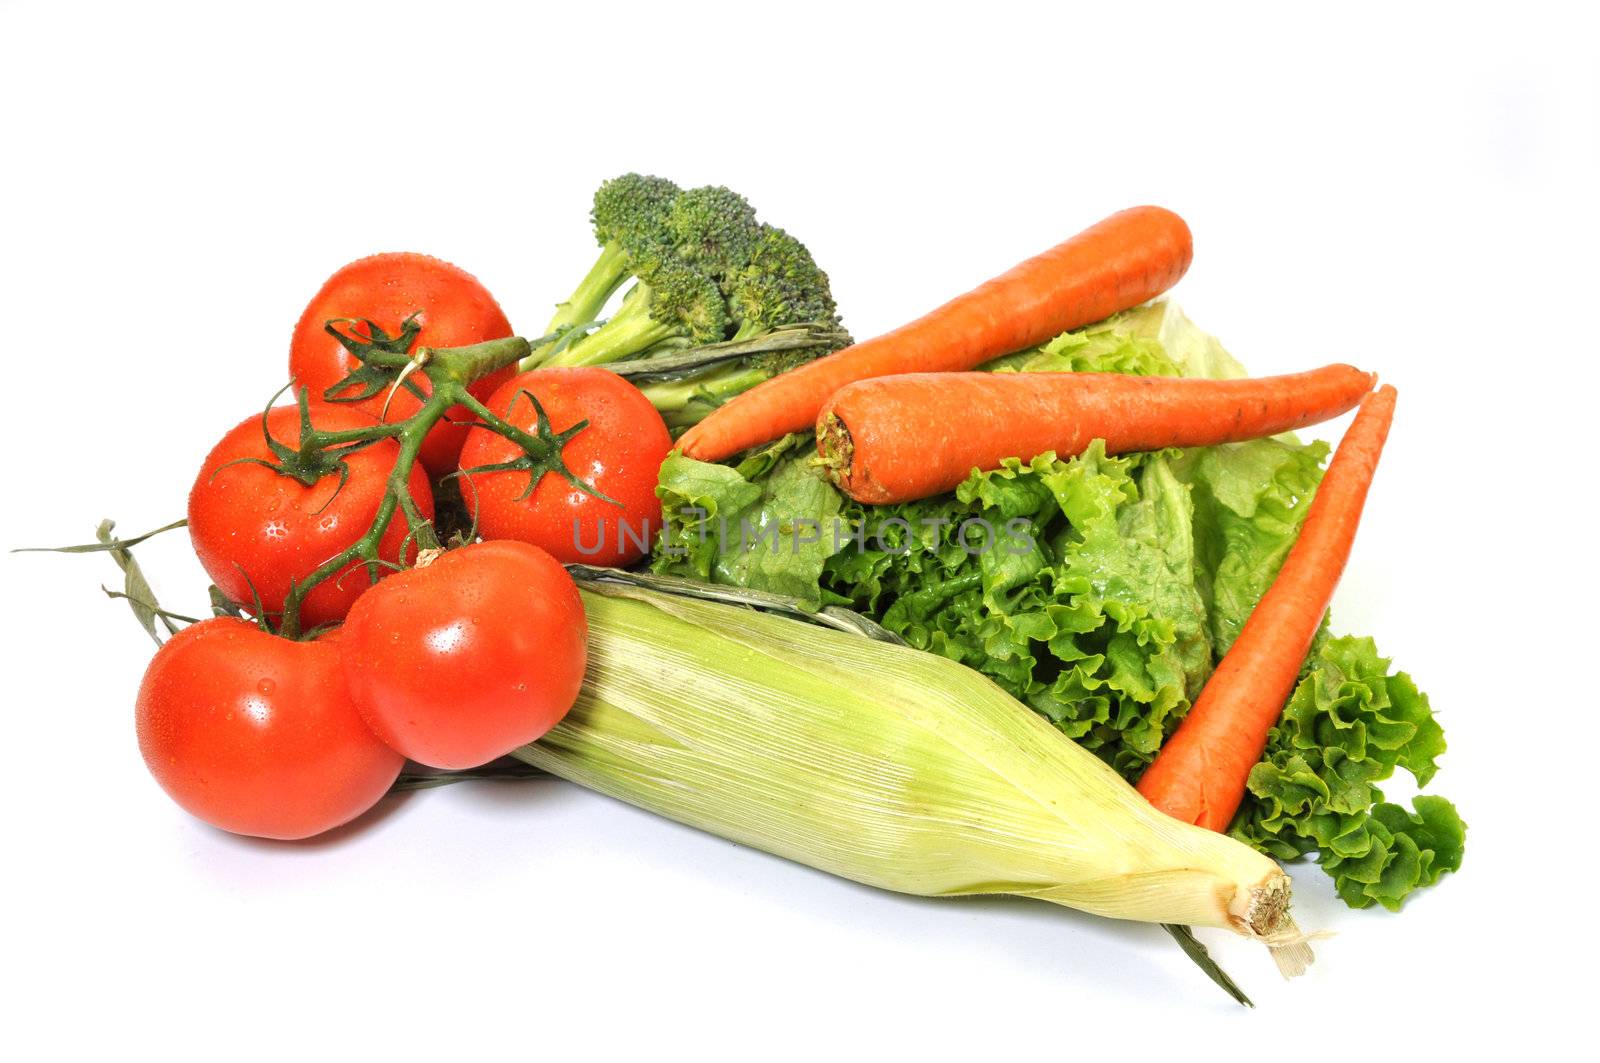 Green leafy lettuce, tomatoes, broccoli, carrots, and corn isolated on white background.